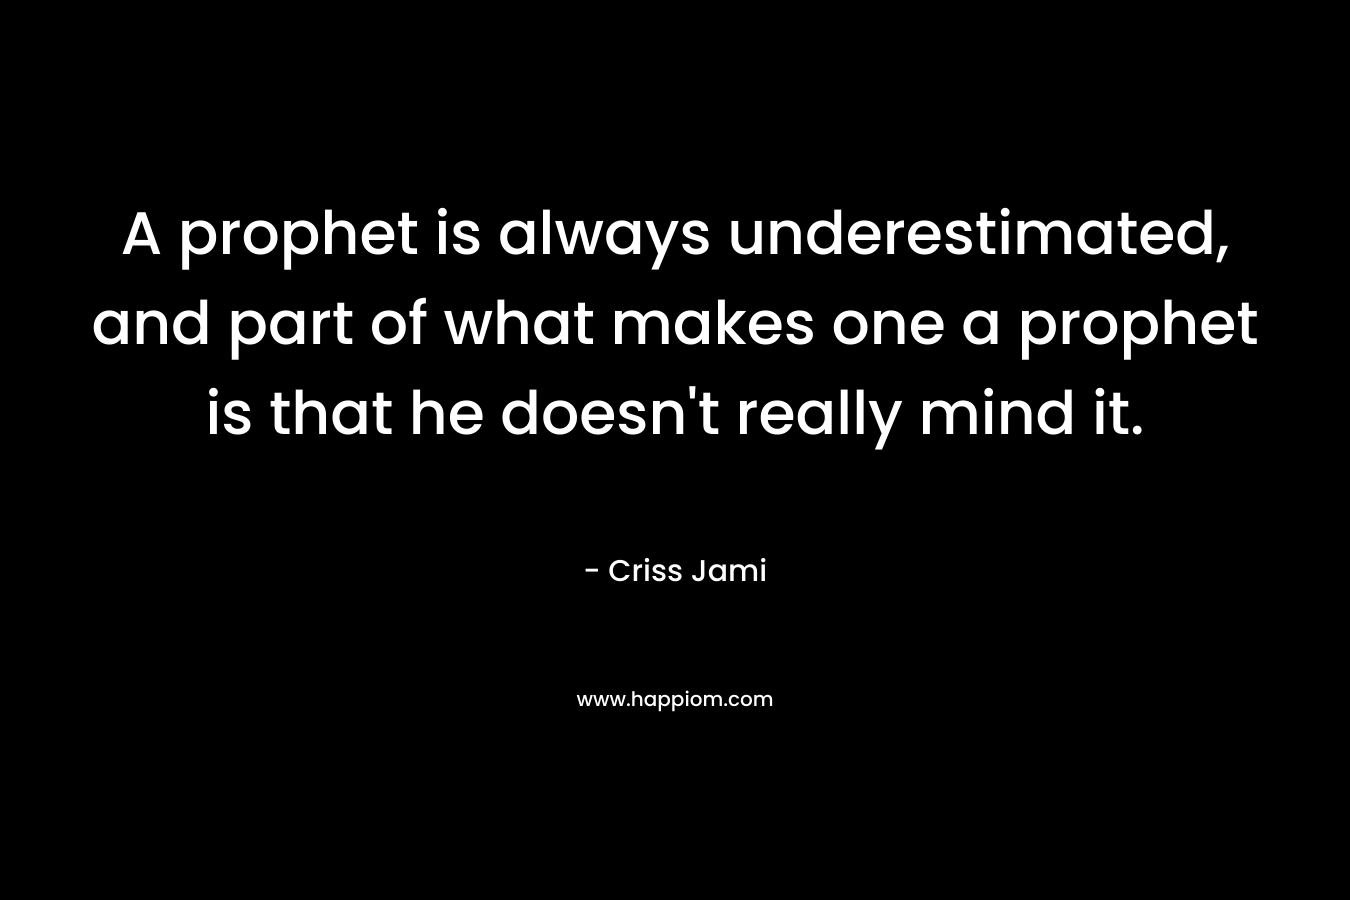 A prophet is always underestimated, and part of what makes one a prophet is that he doesn't really mind it.